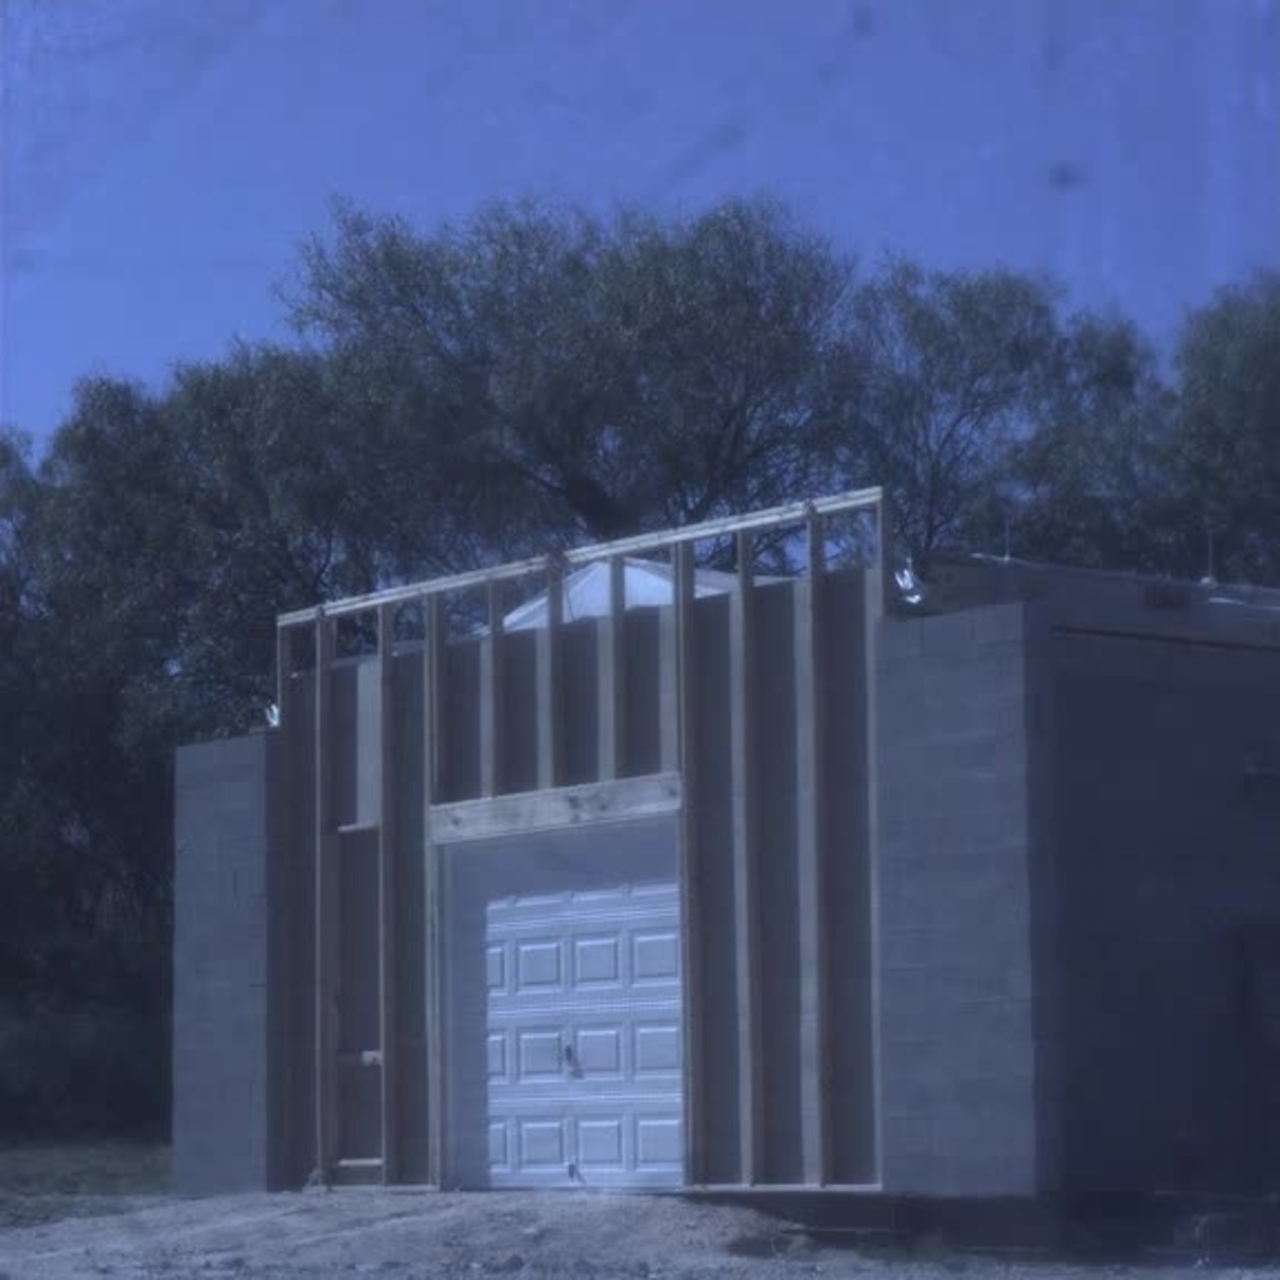 Test 6: Dispersion and Burning Behavior of Hydrogen Released in a Full-Scale Residential Garage in the Presence and Absence of Conventional Automobiles (View of garage exterior from high-speed camera)